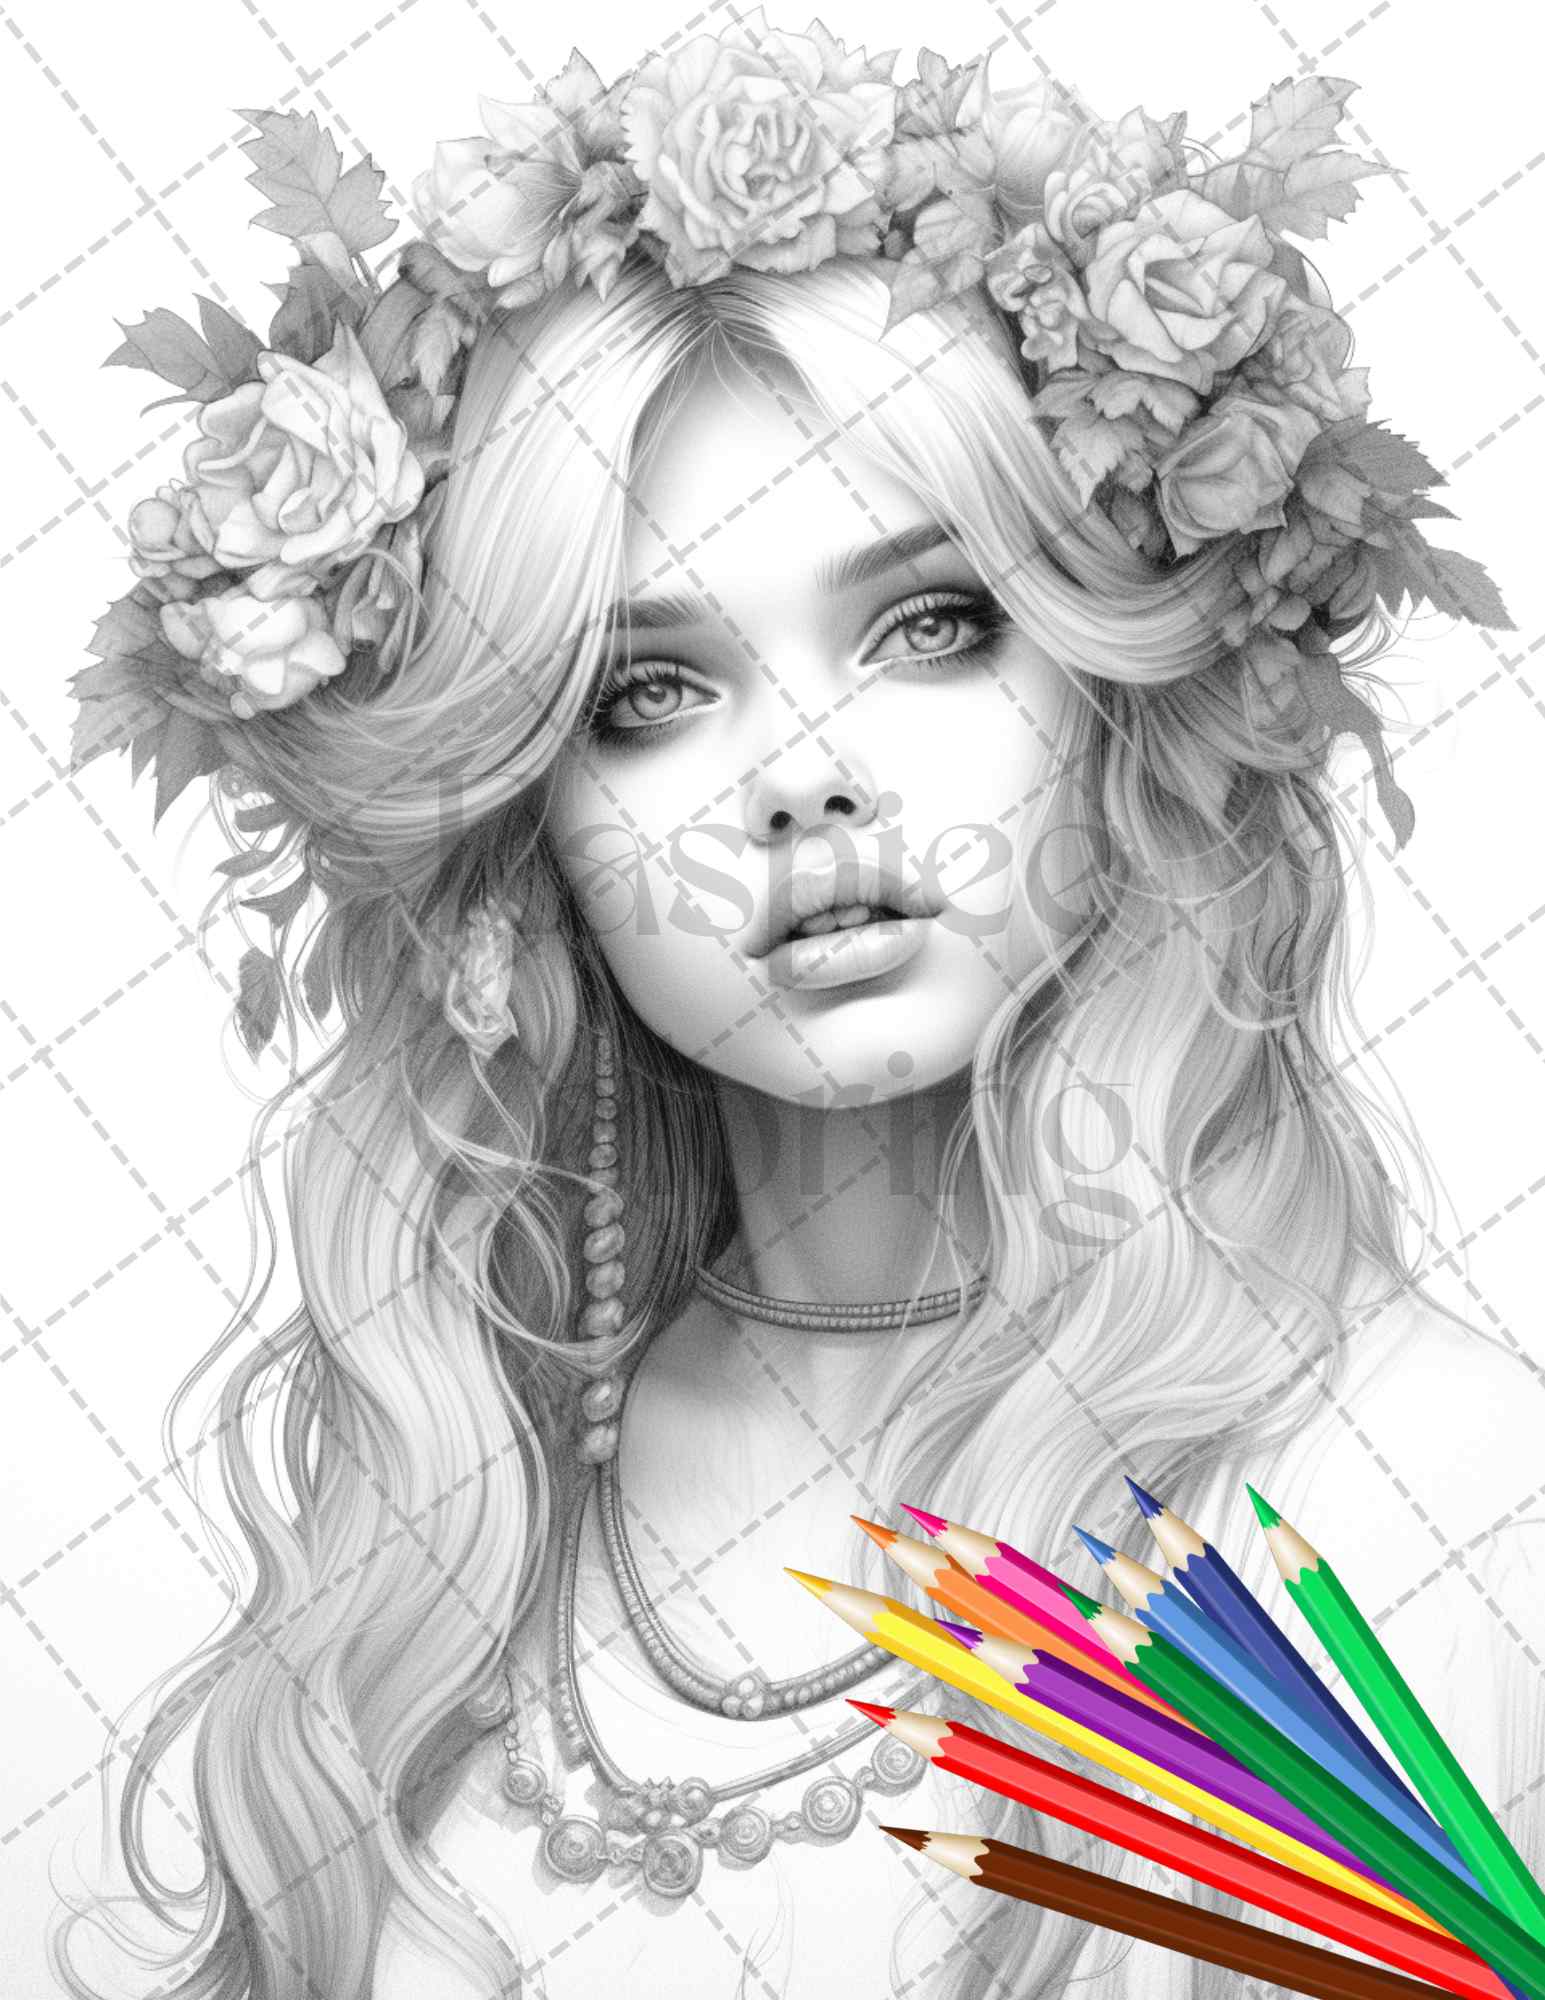 30 Gothic Girls Set 2 Coloring Pages Bright, Medium and Dark Versions  Printable Adult Coloring Pages Download Grayscale Illustration 